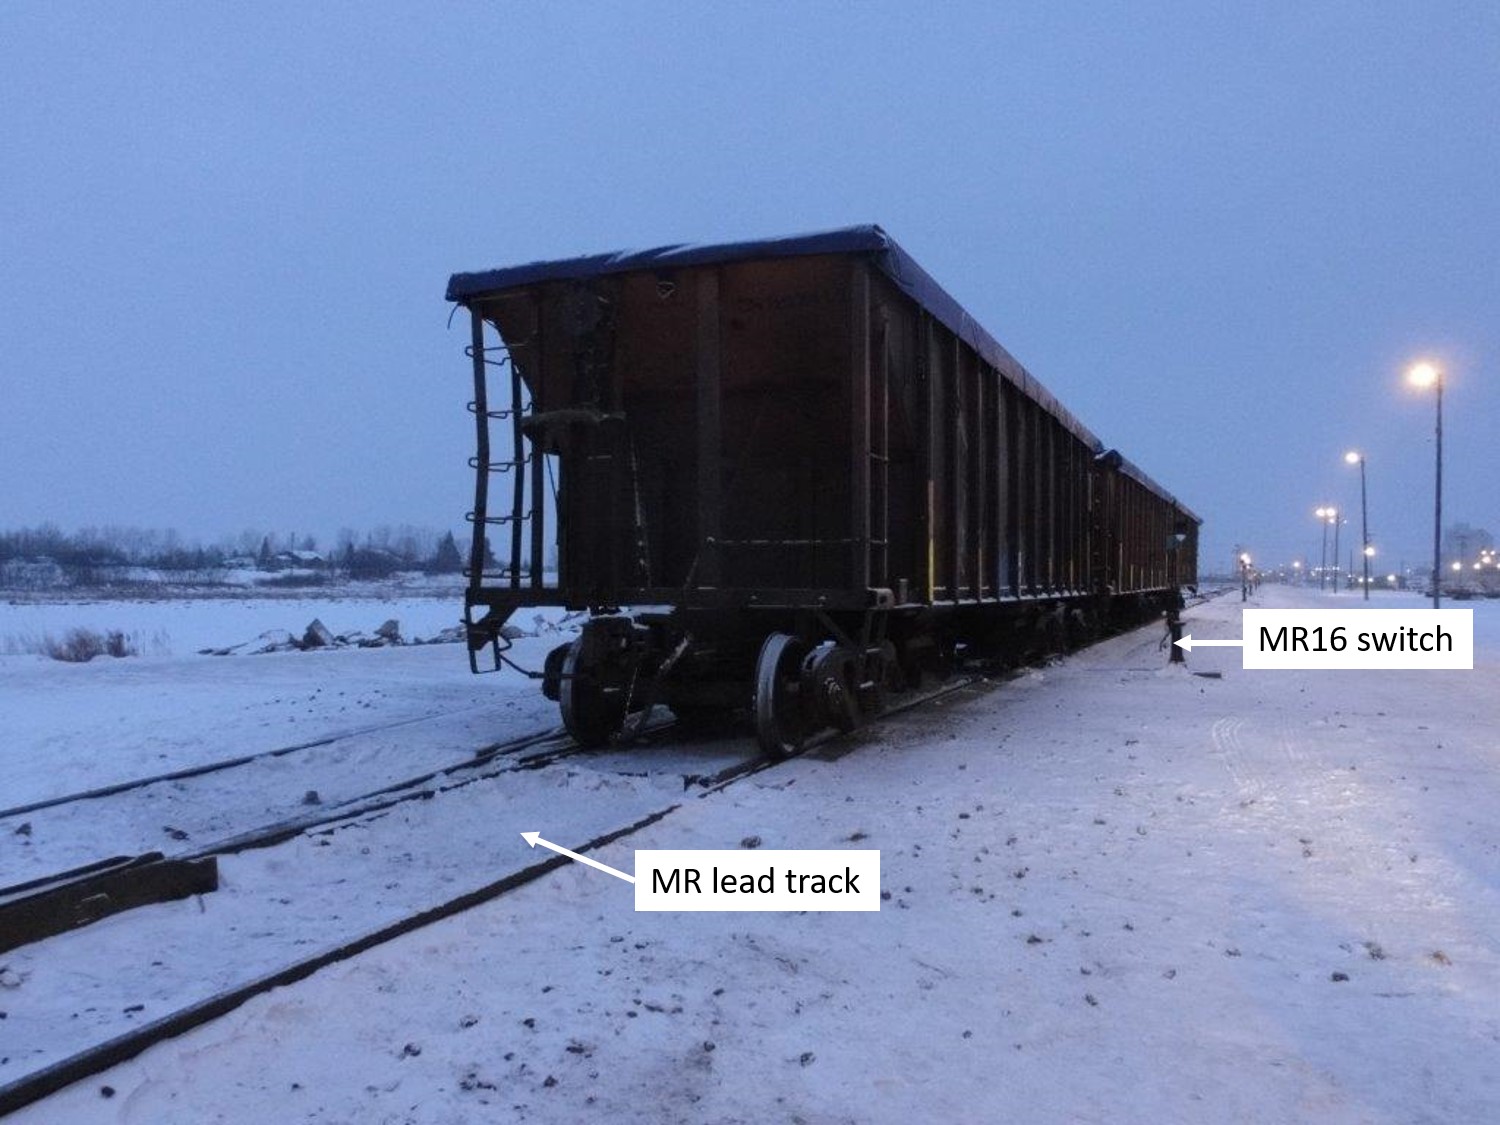 Occurrence open-top hopper cars staged on the MR lead track near the MR16 switch (Source: Canadian National Railway Company, with TSB annotations)